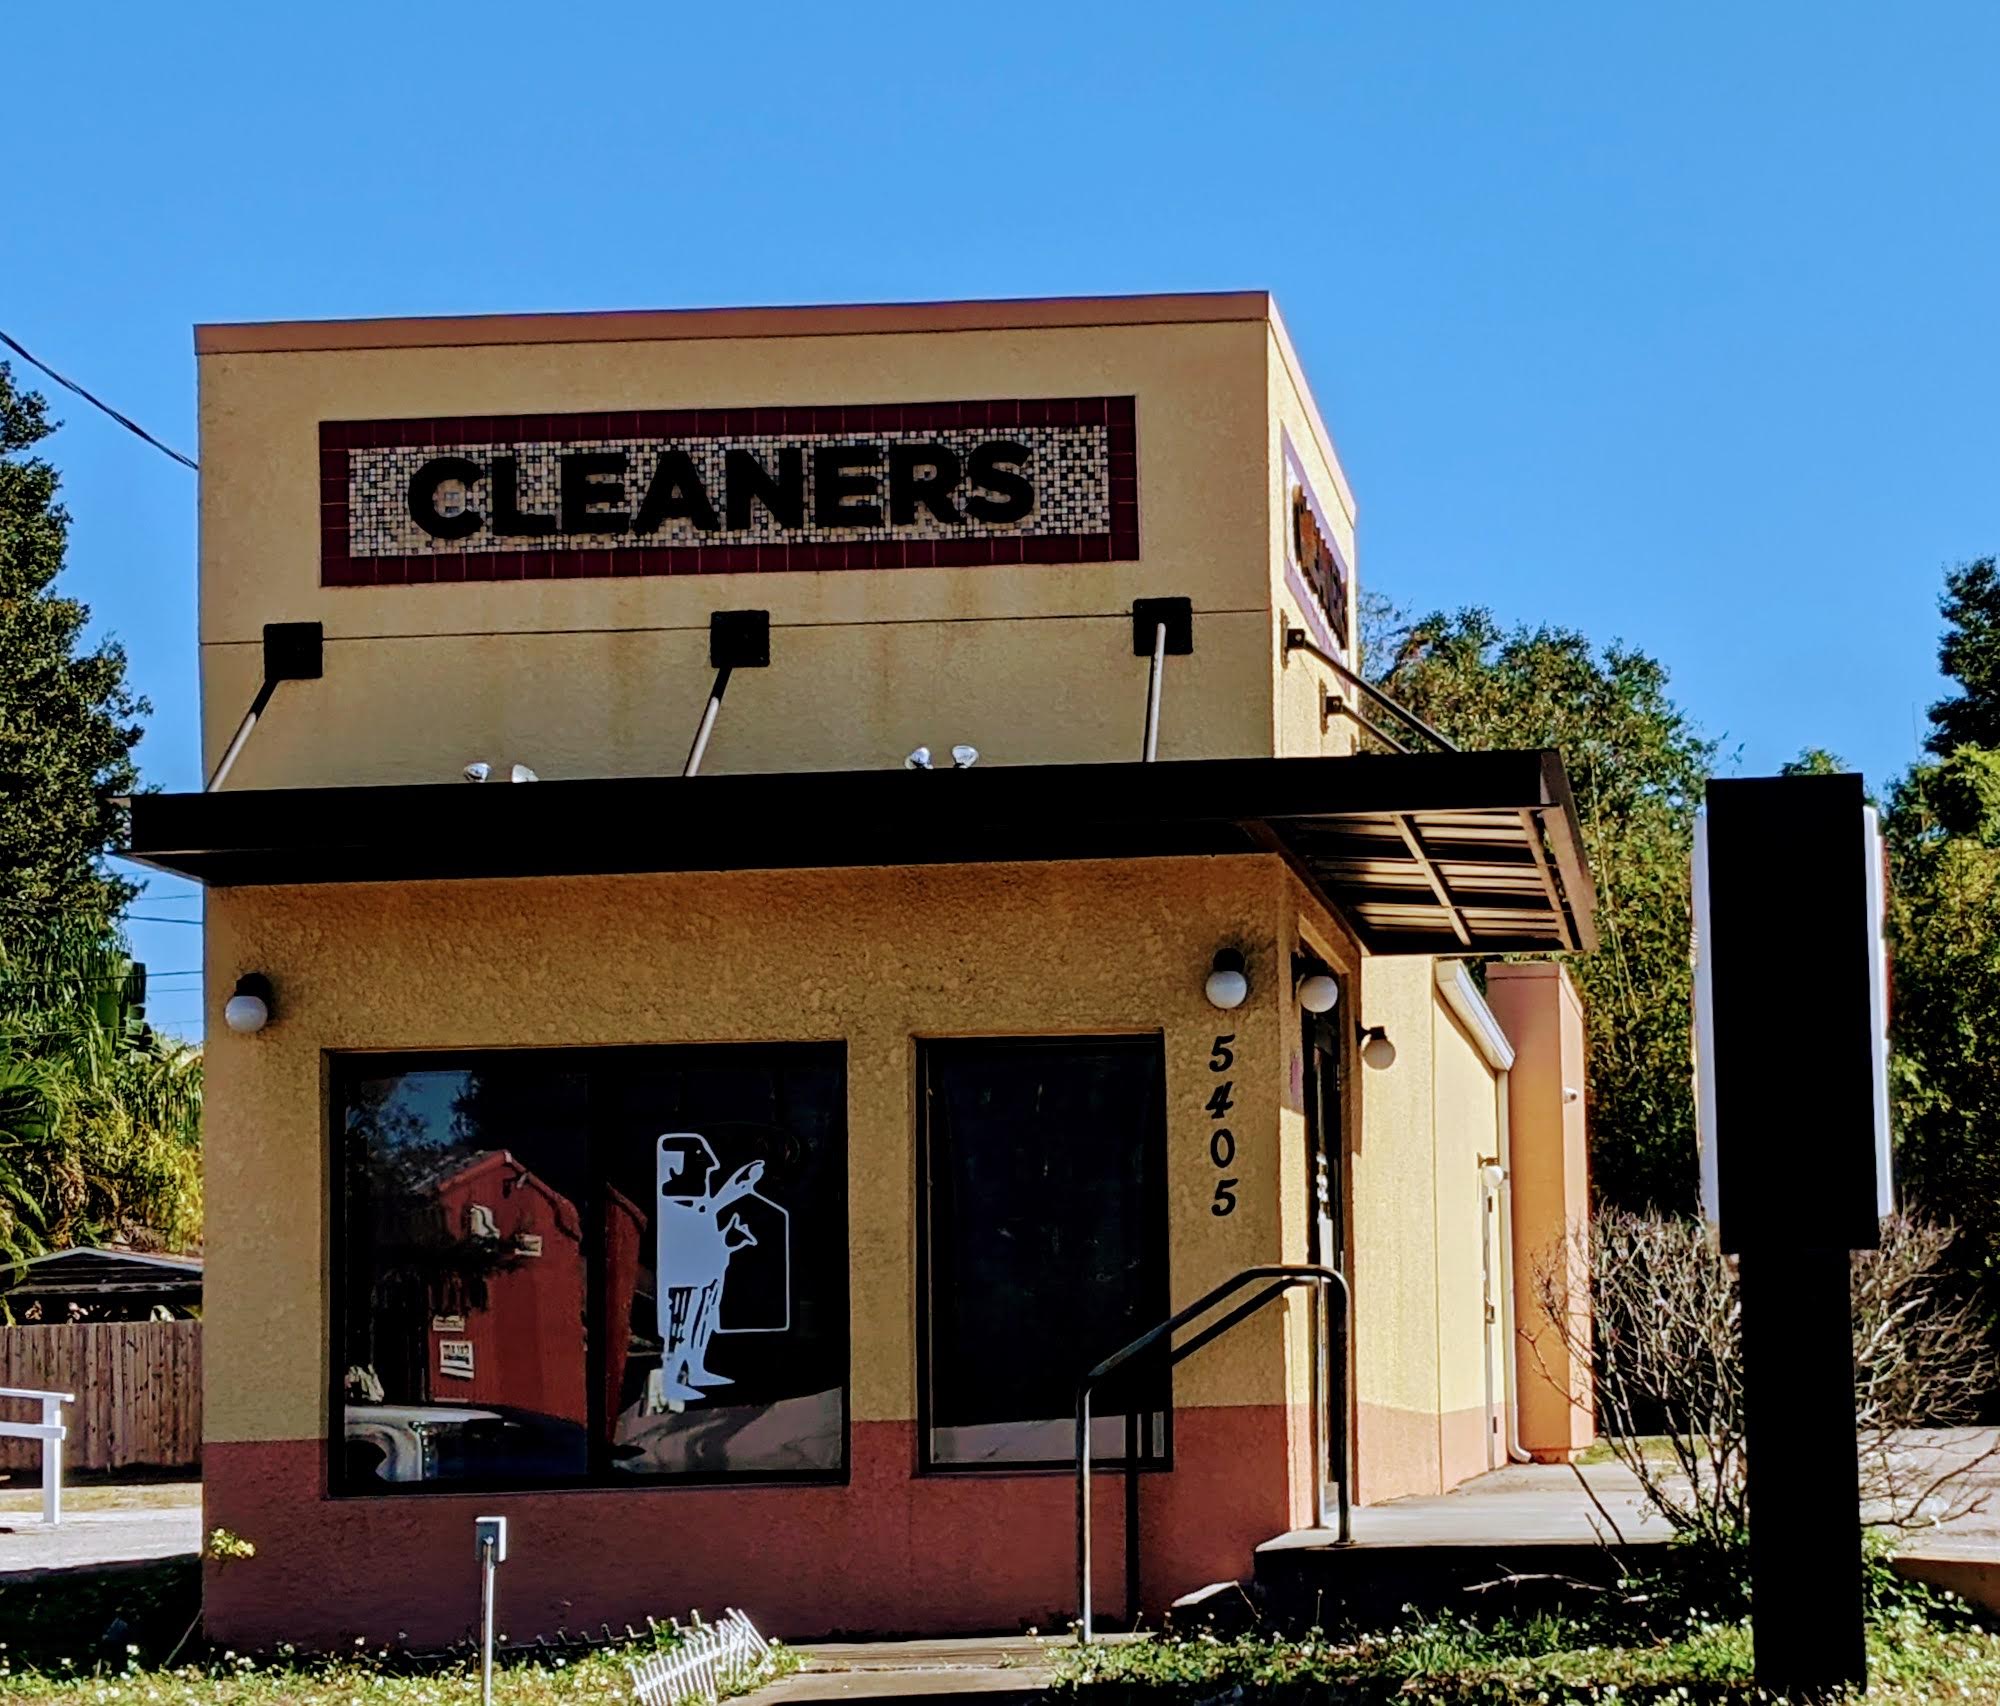 Riverheights Cleaners